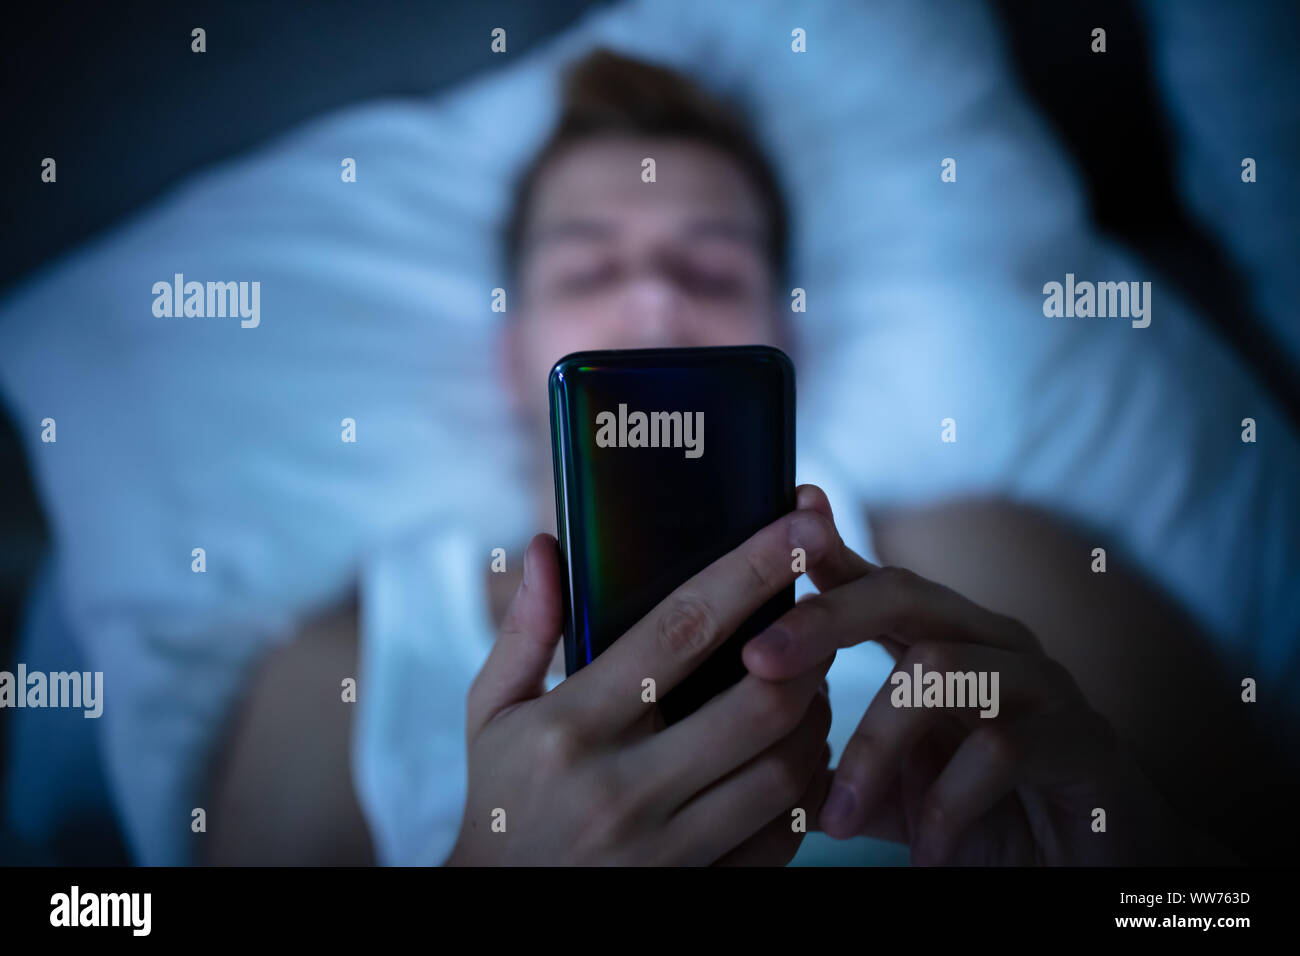 Man In Bed With Mobile Phone At Night Stock Photo